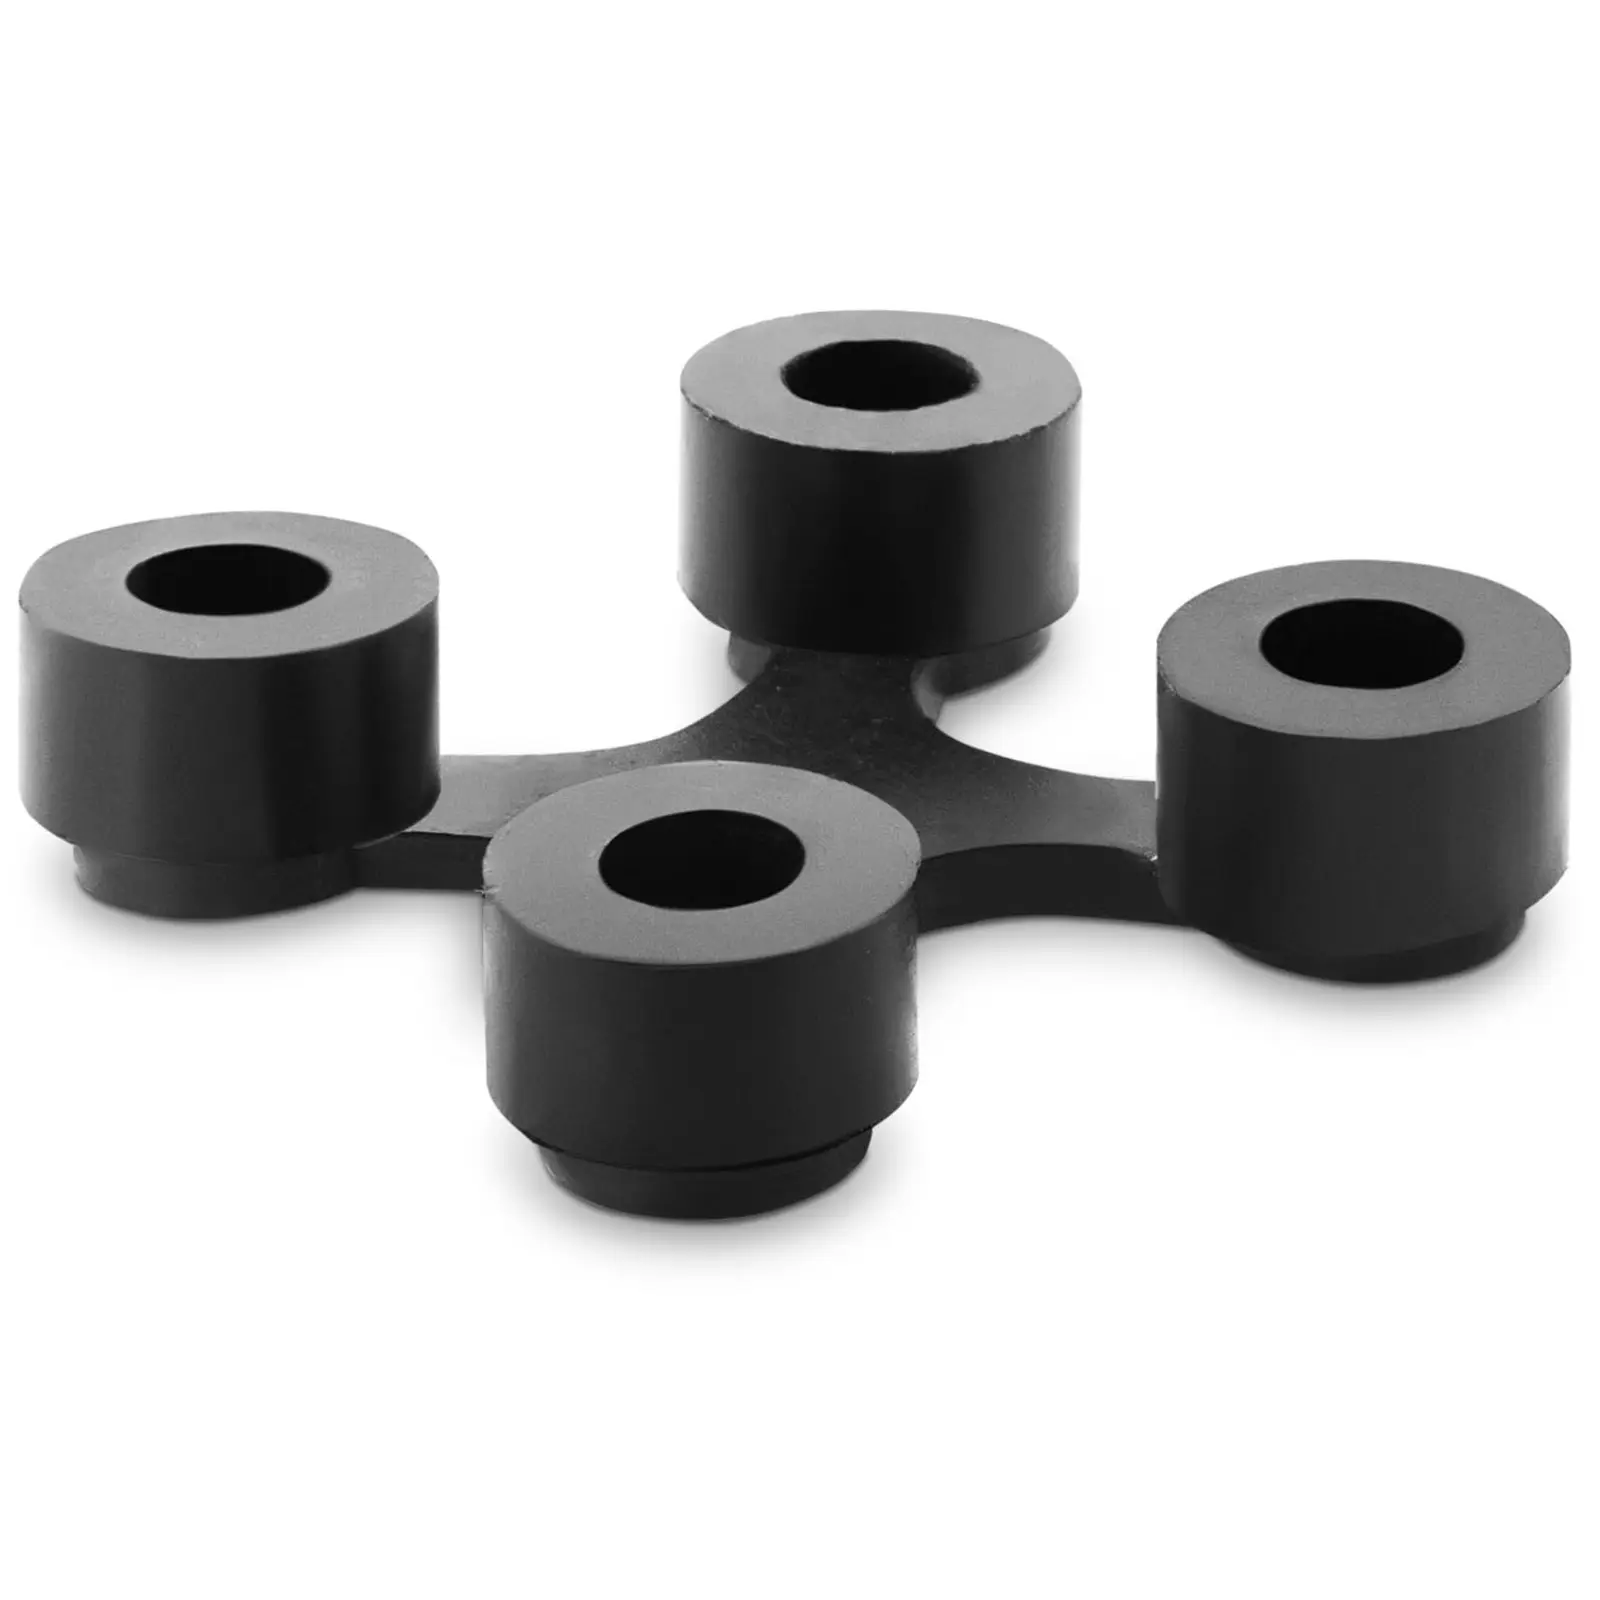 Connecting pieces - for ring rubber mat 10050276 